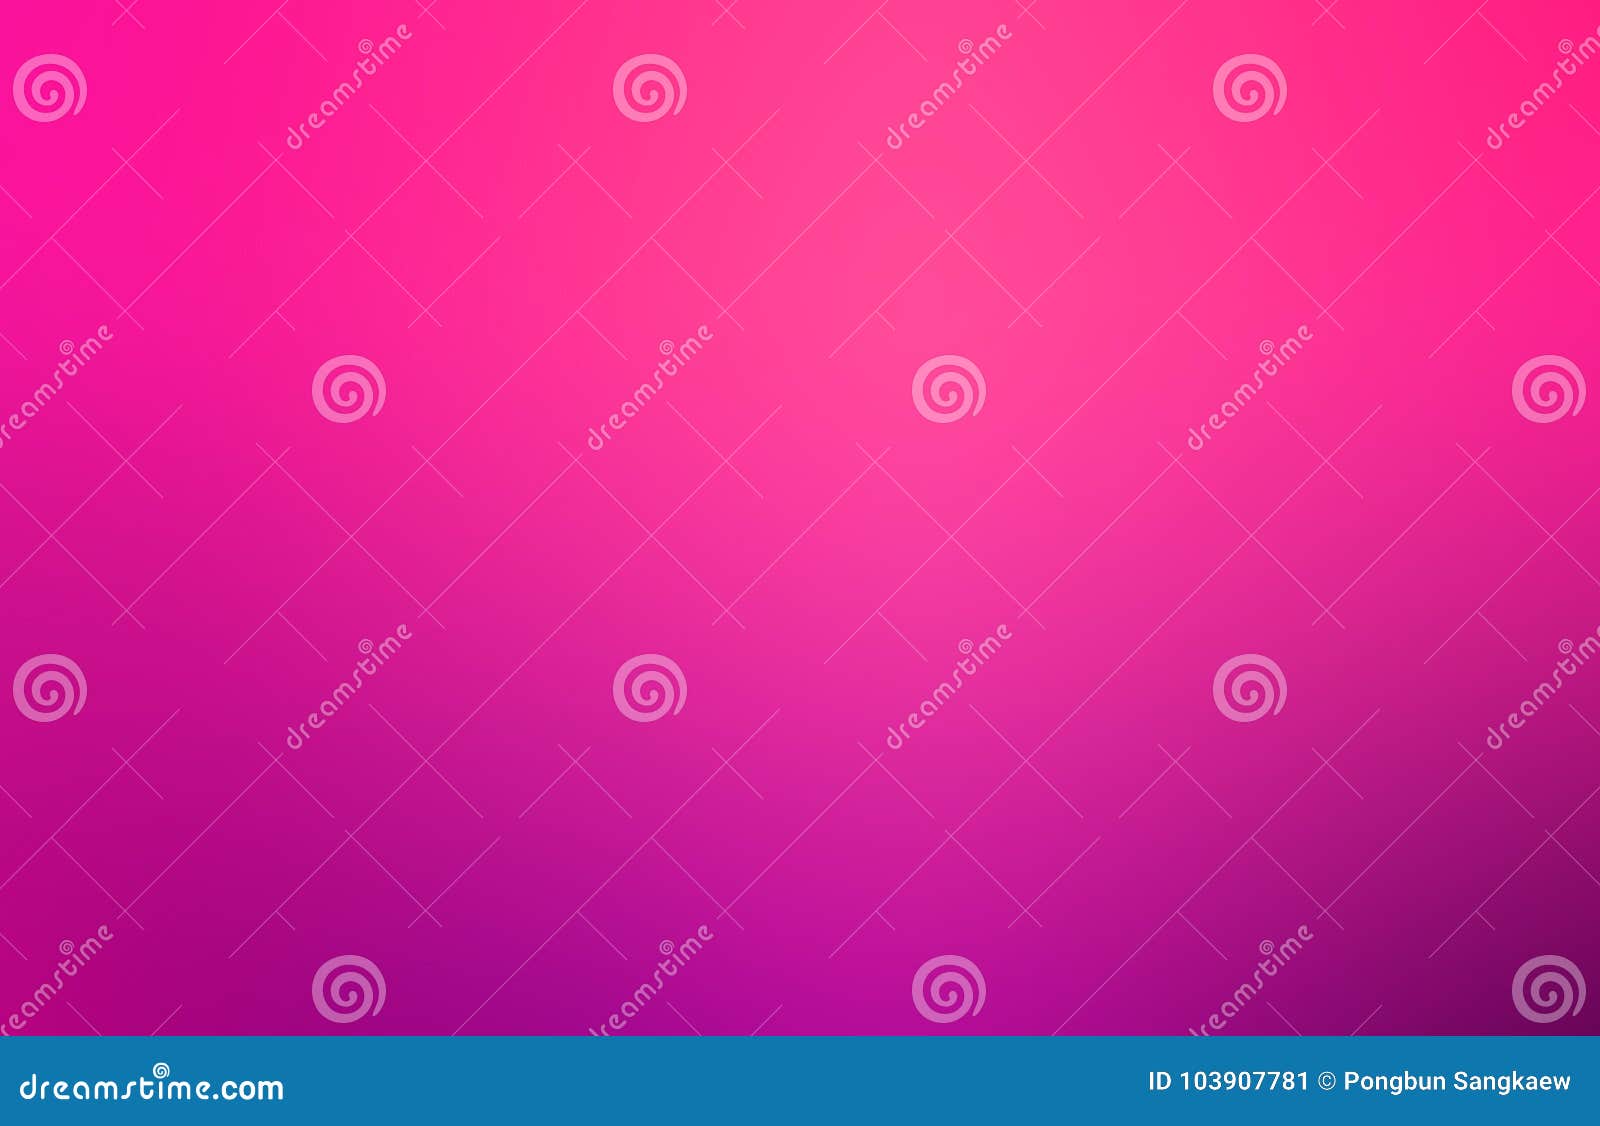 gradient purple and pink background